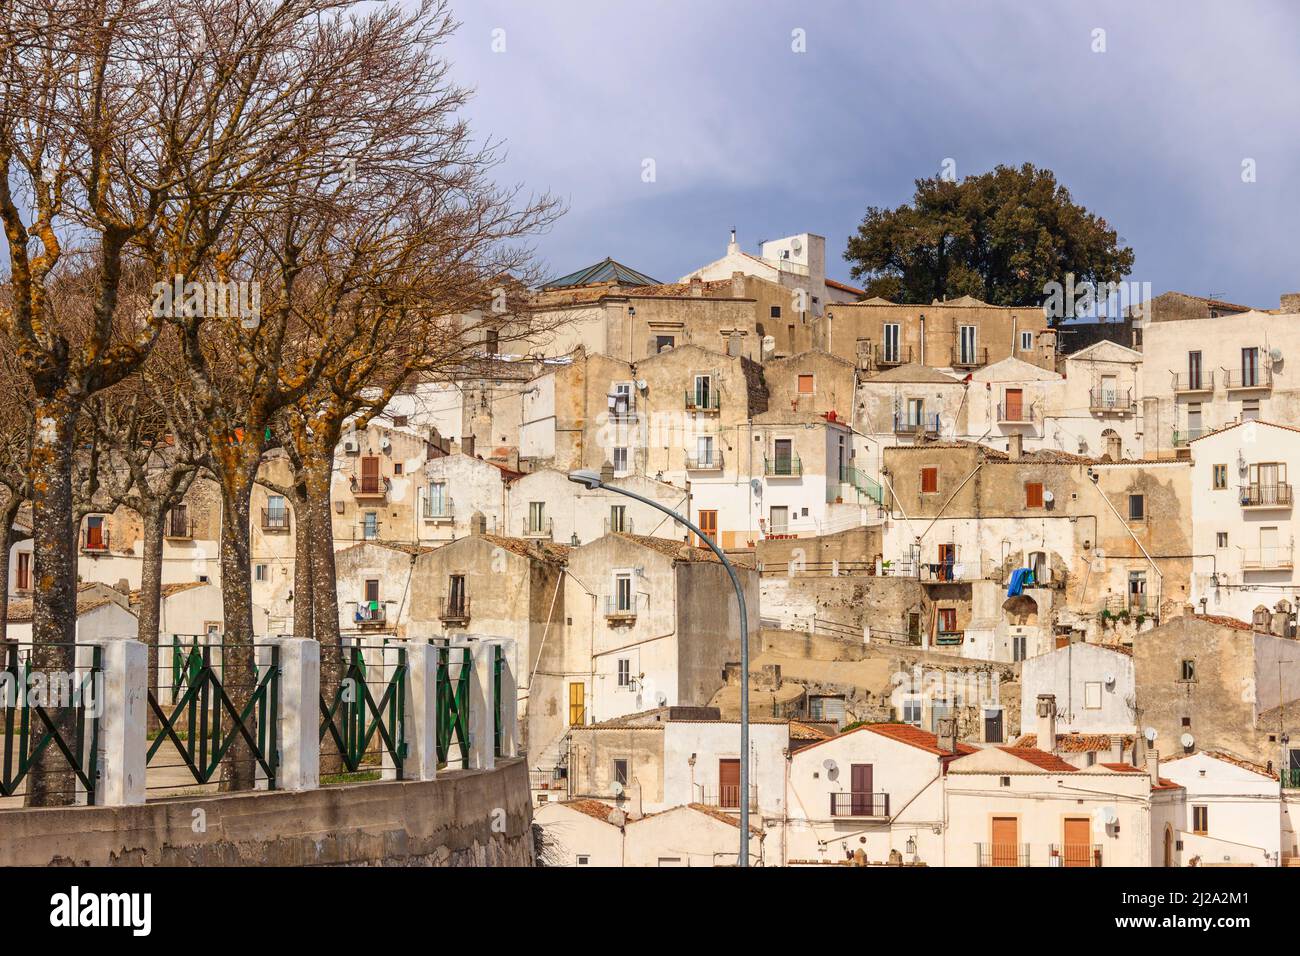 Monte Sant'Angelo is a town on the slopes of Gargano in Apulia, Italy. Stock Photo